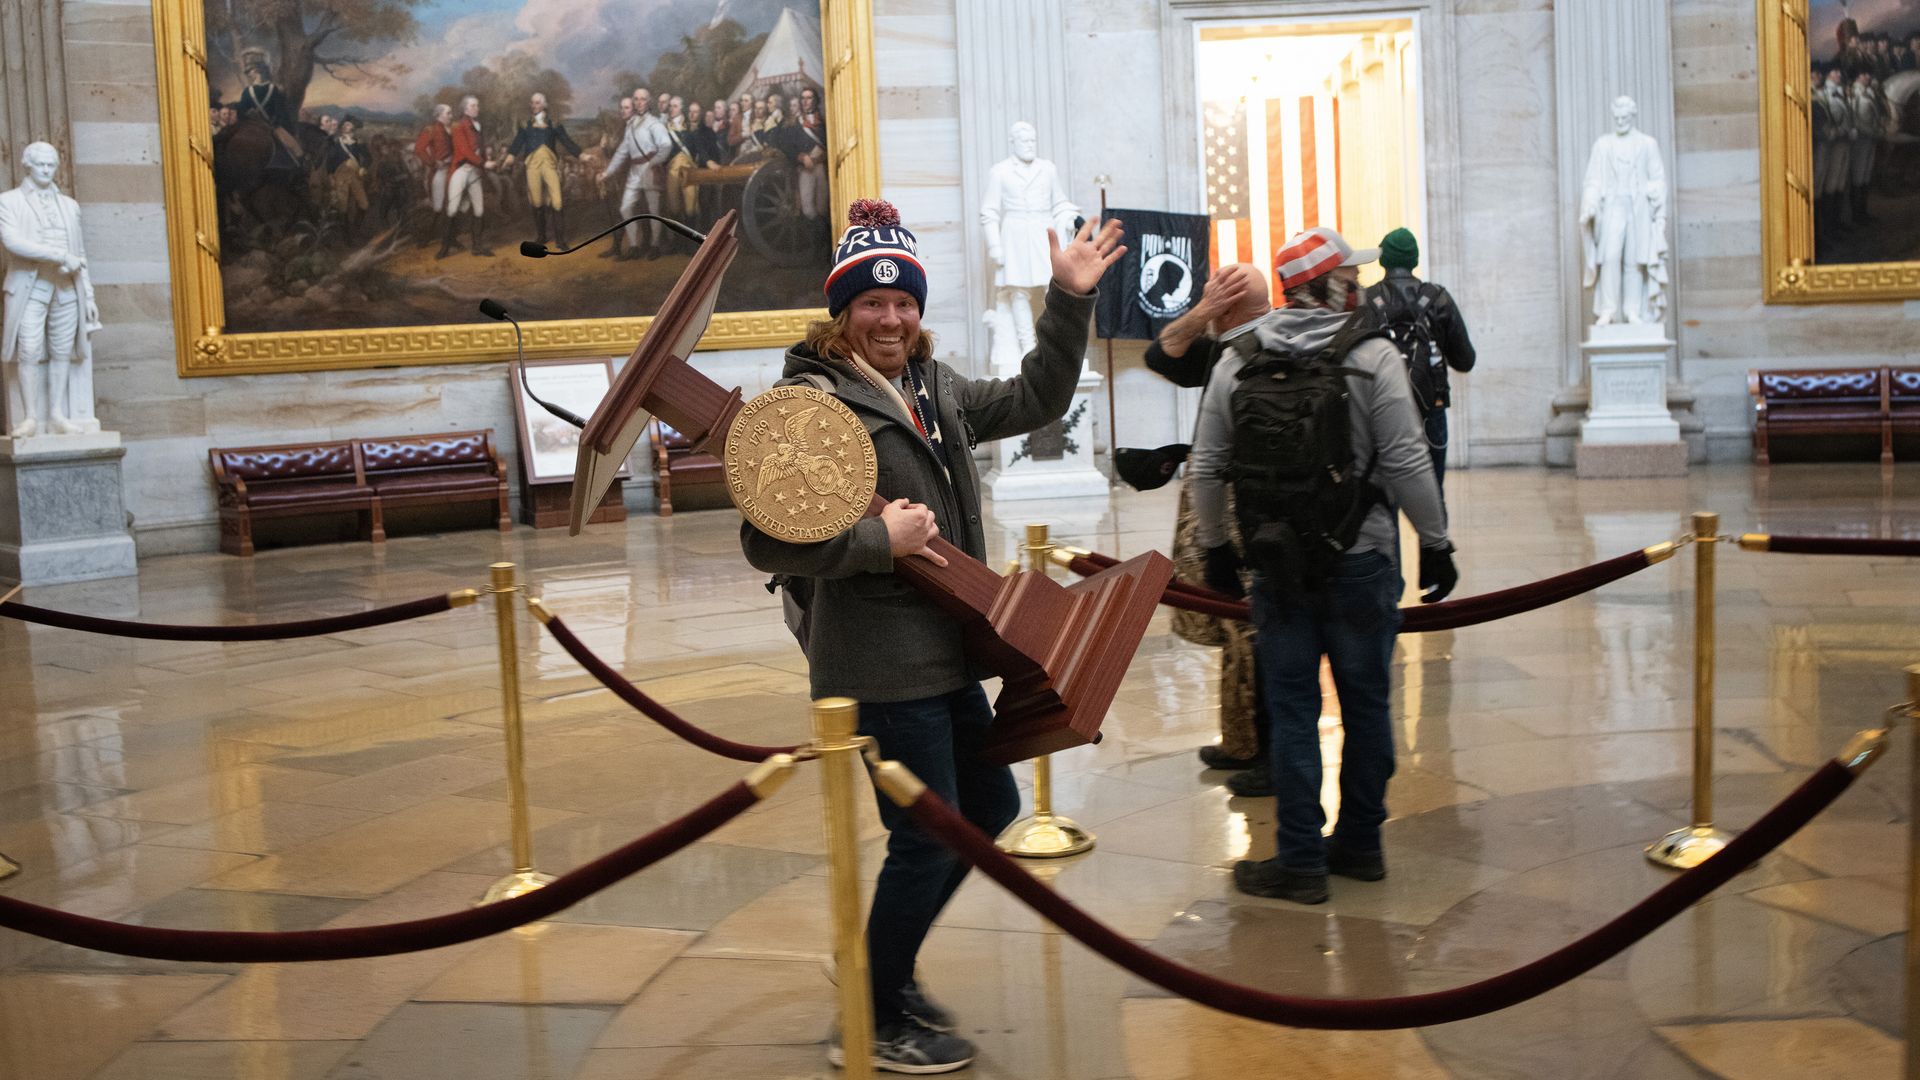 Man in beanie waves at the camera while carrying a lectern inside the capitol building.